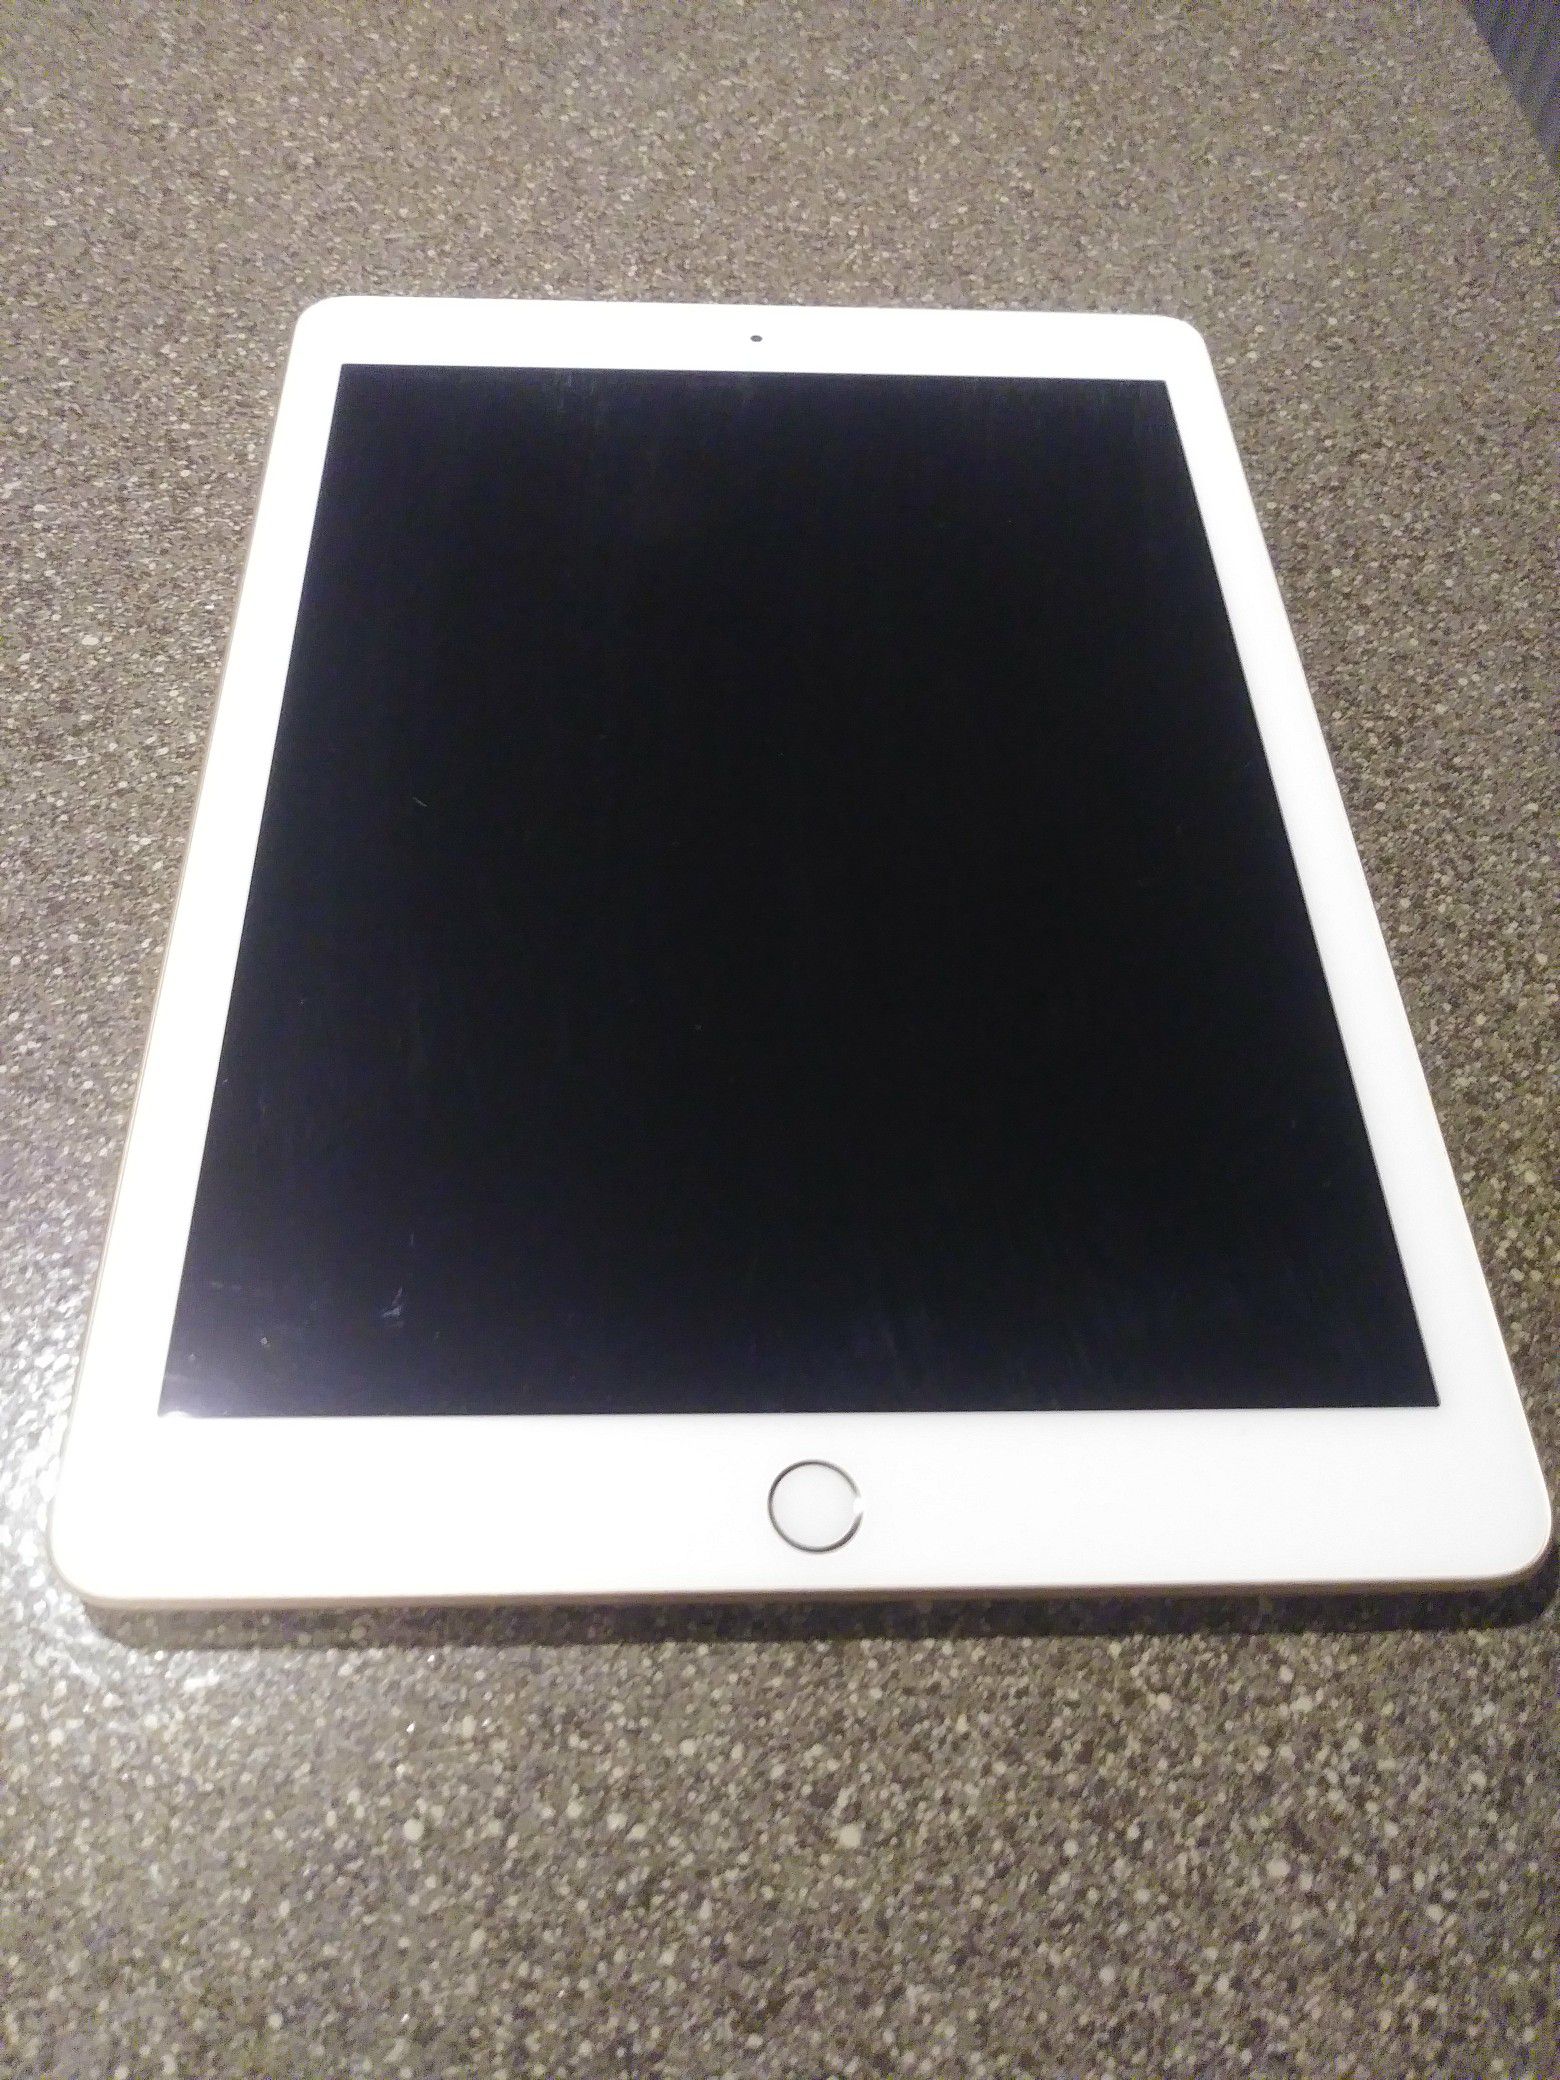 Ipad rose gold 6th Gen 128 GB w charger